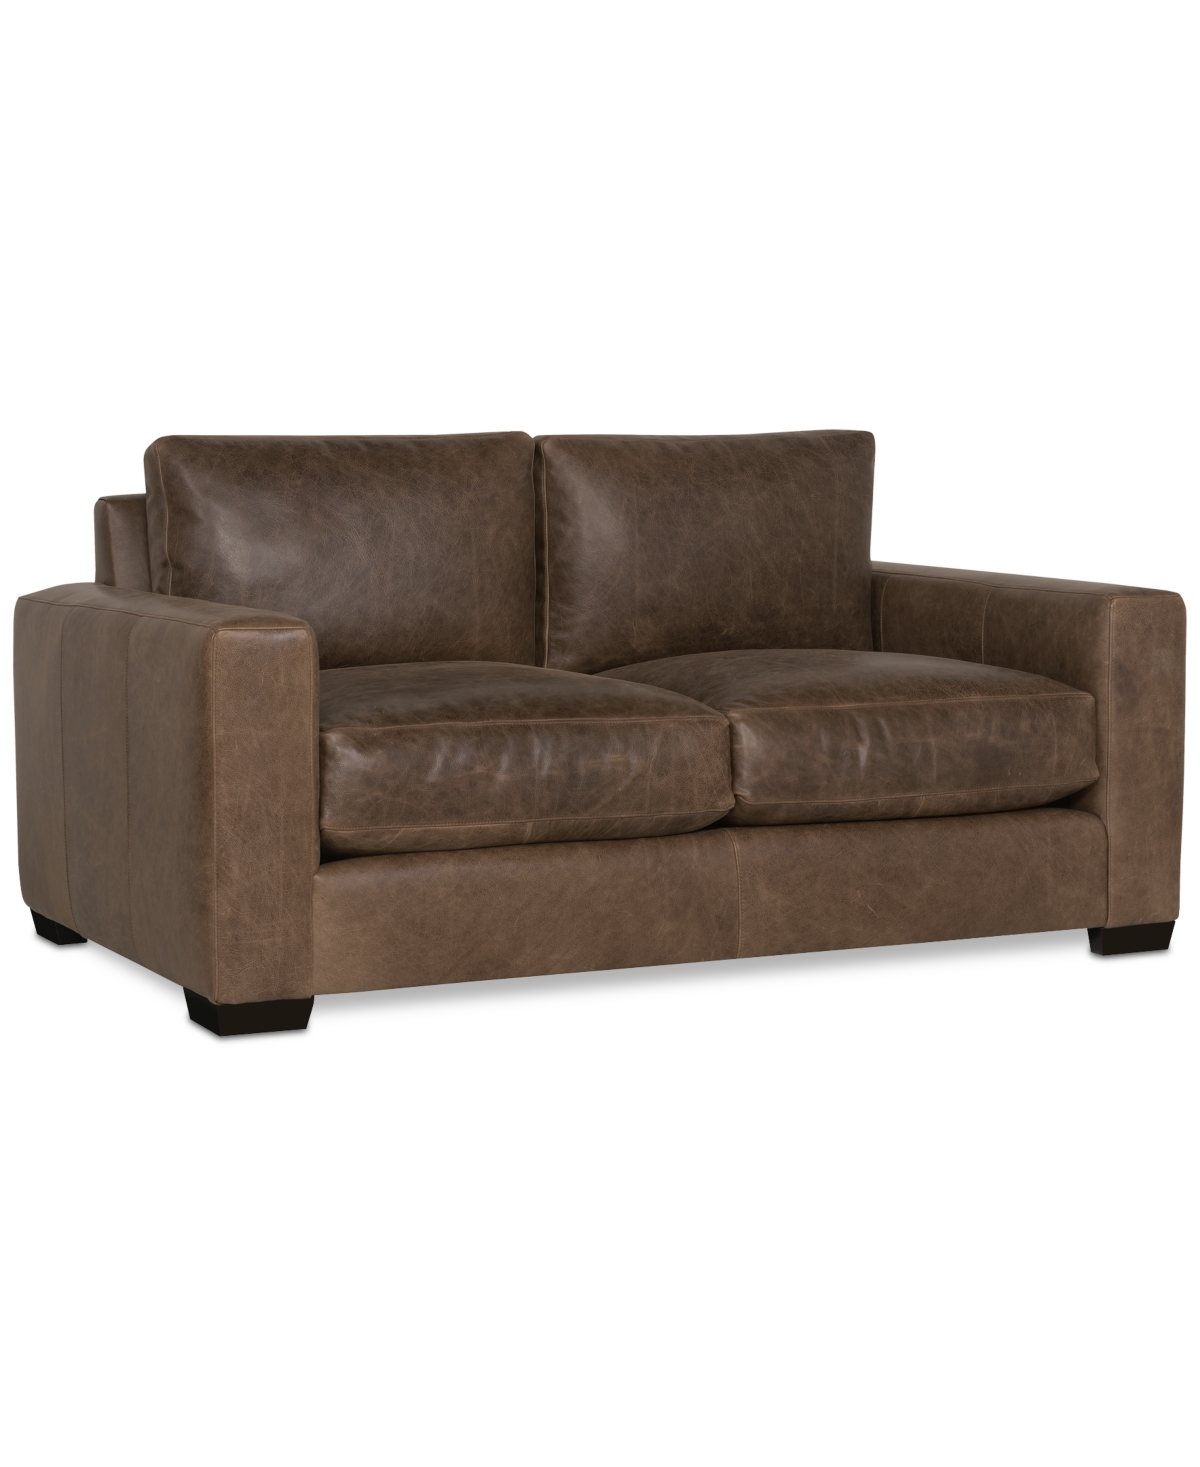 Furniture Dawkins 68.5" Leather Loveseat, Created For Macy's In Stone